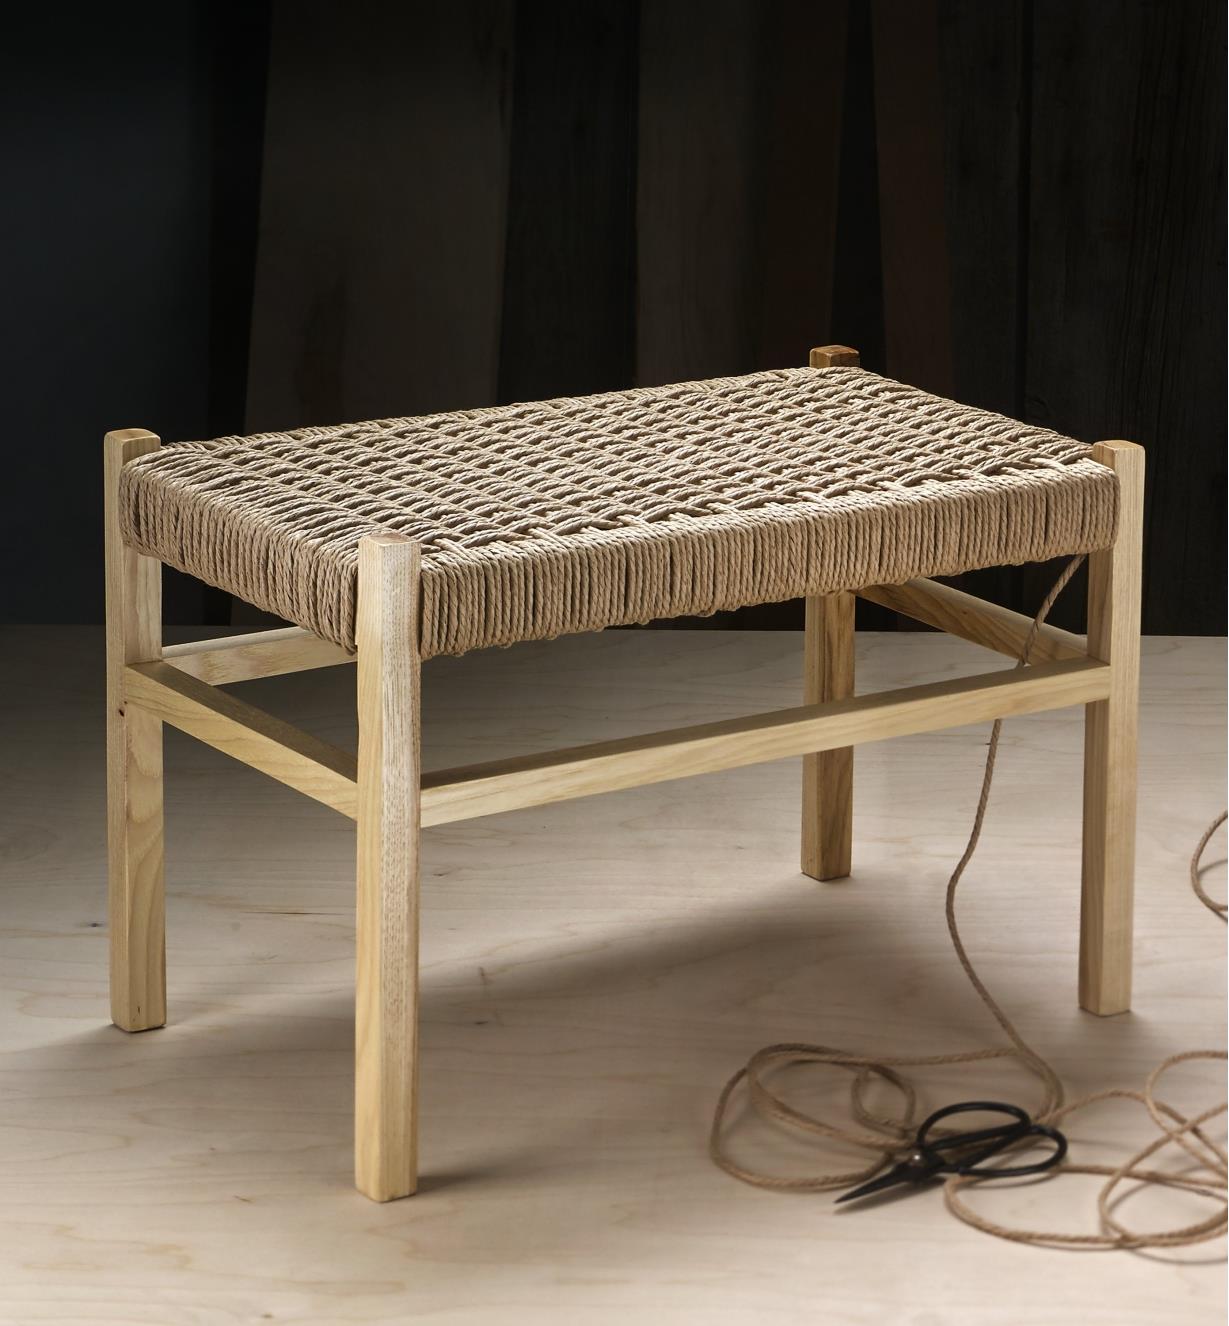 Stool with woven Danish cord seat